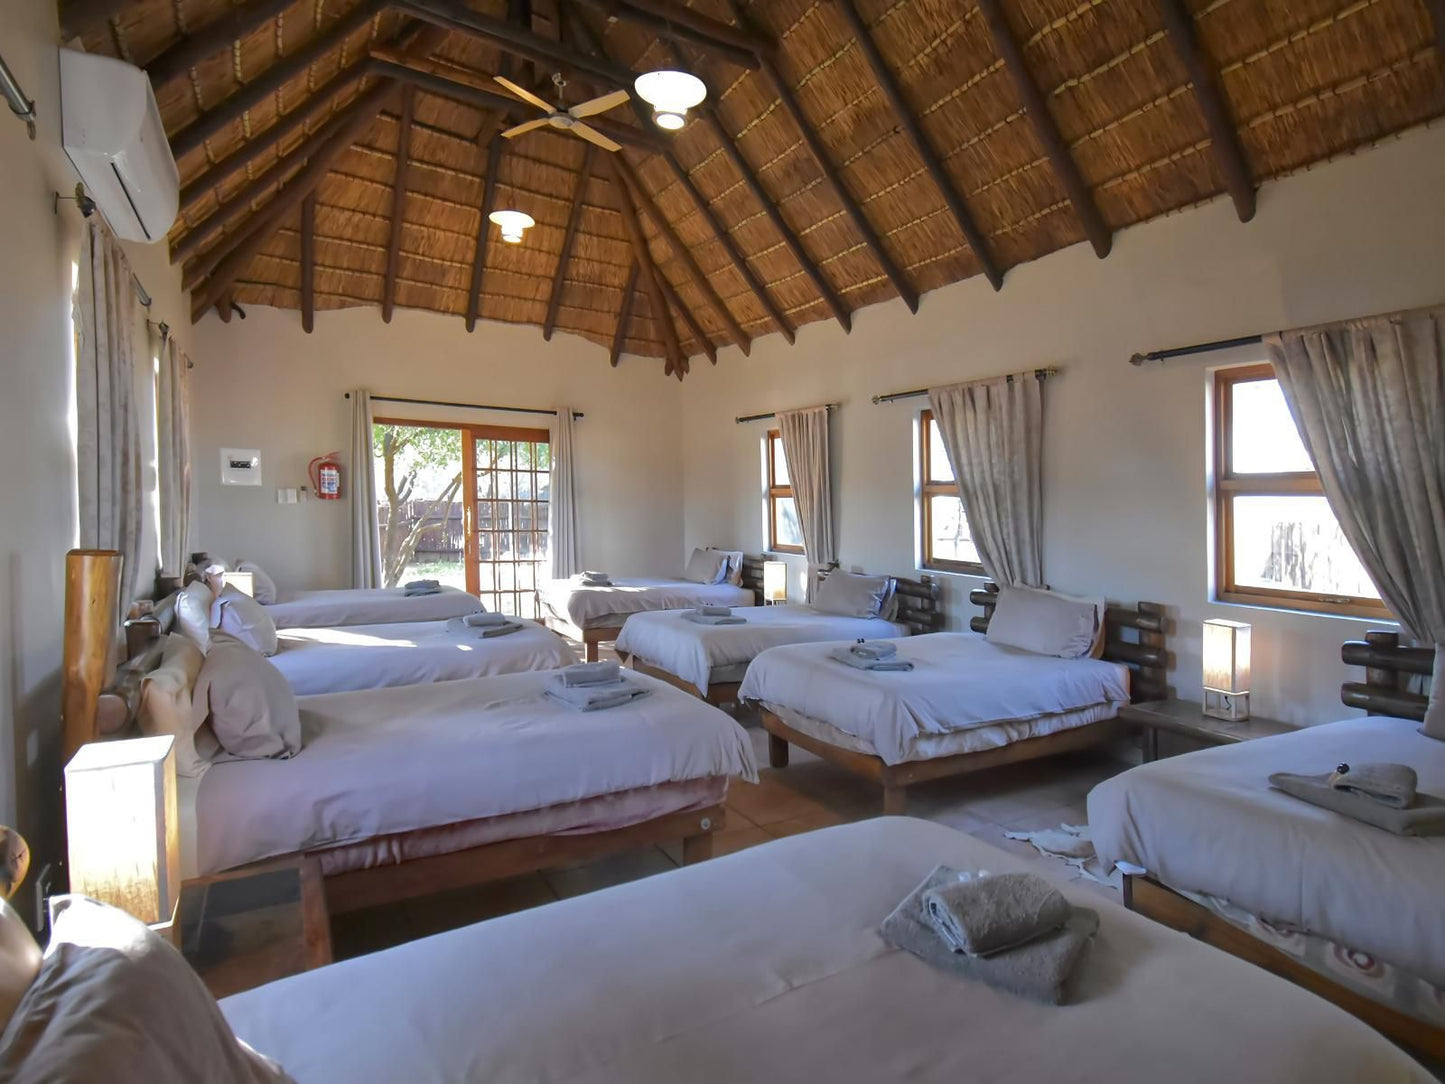 Woodside Game Lodge Mahikeng North West Province South Africa Bedroom